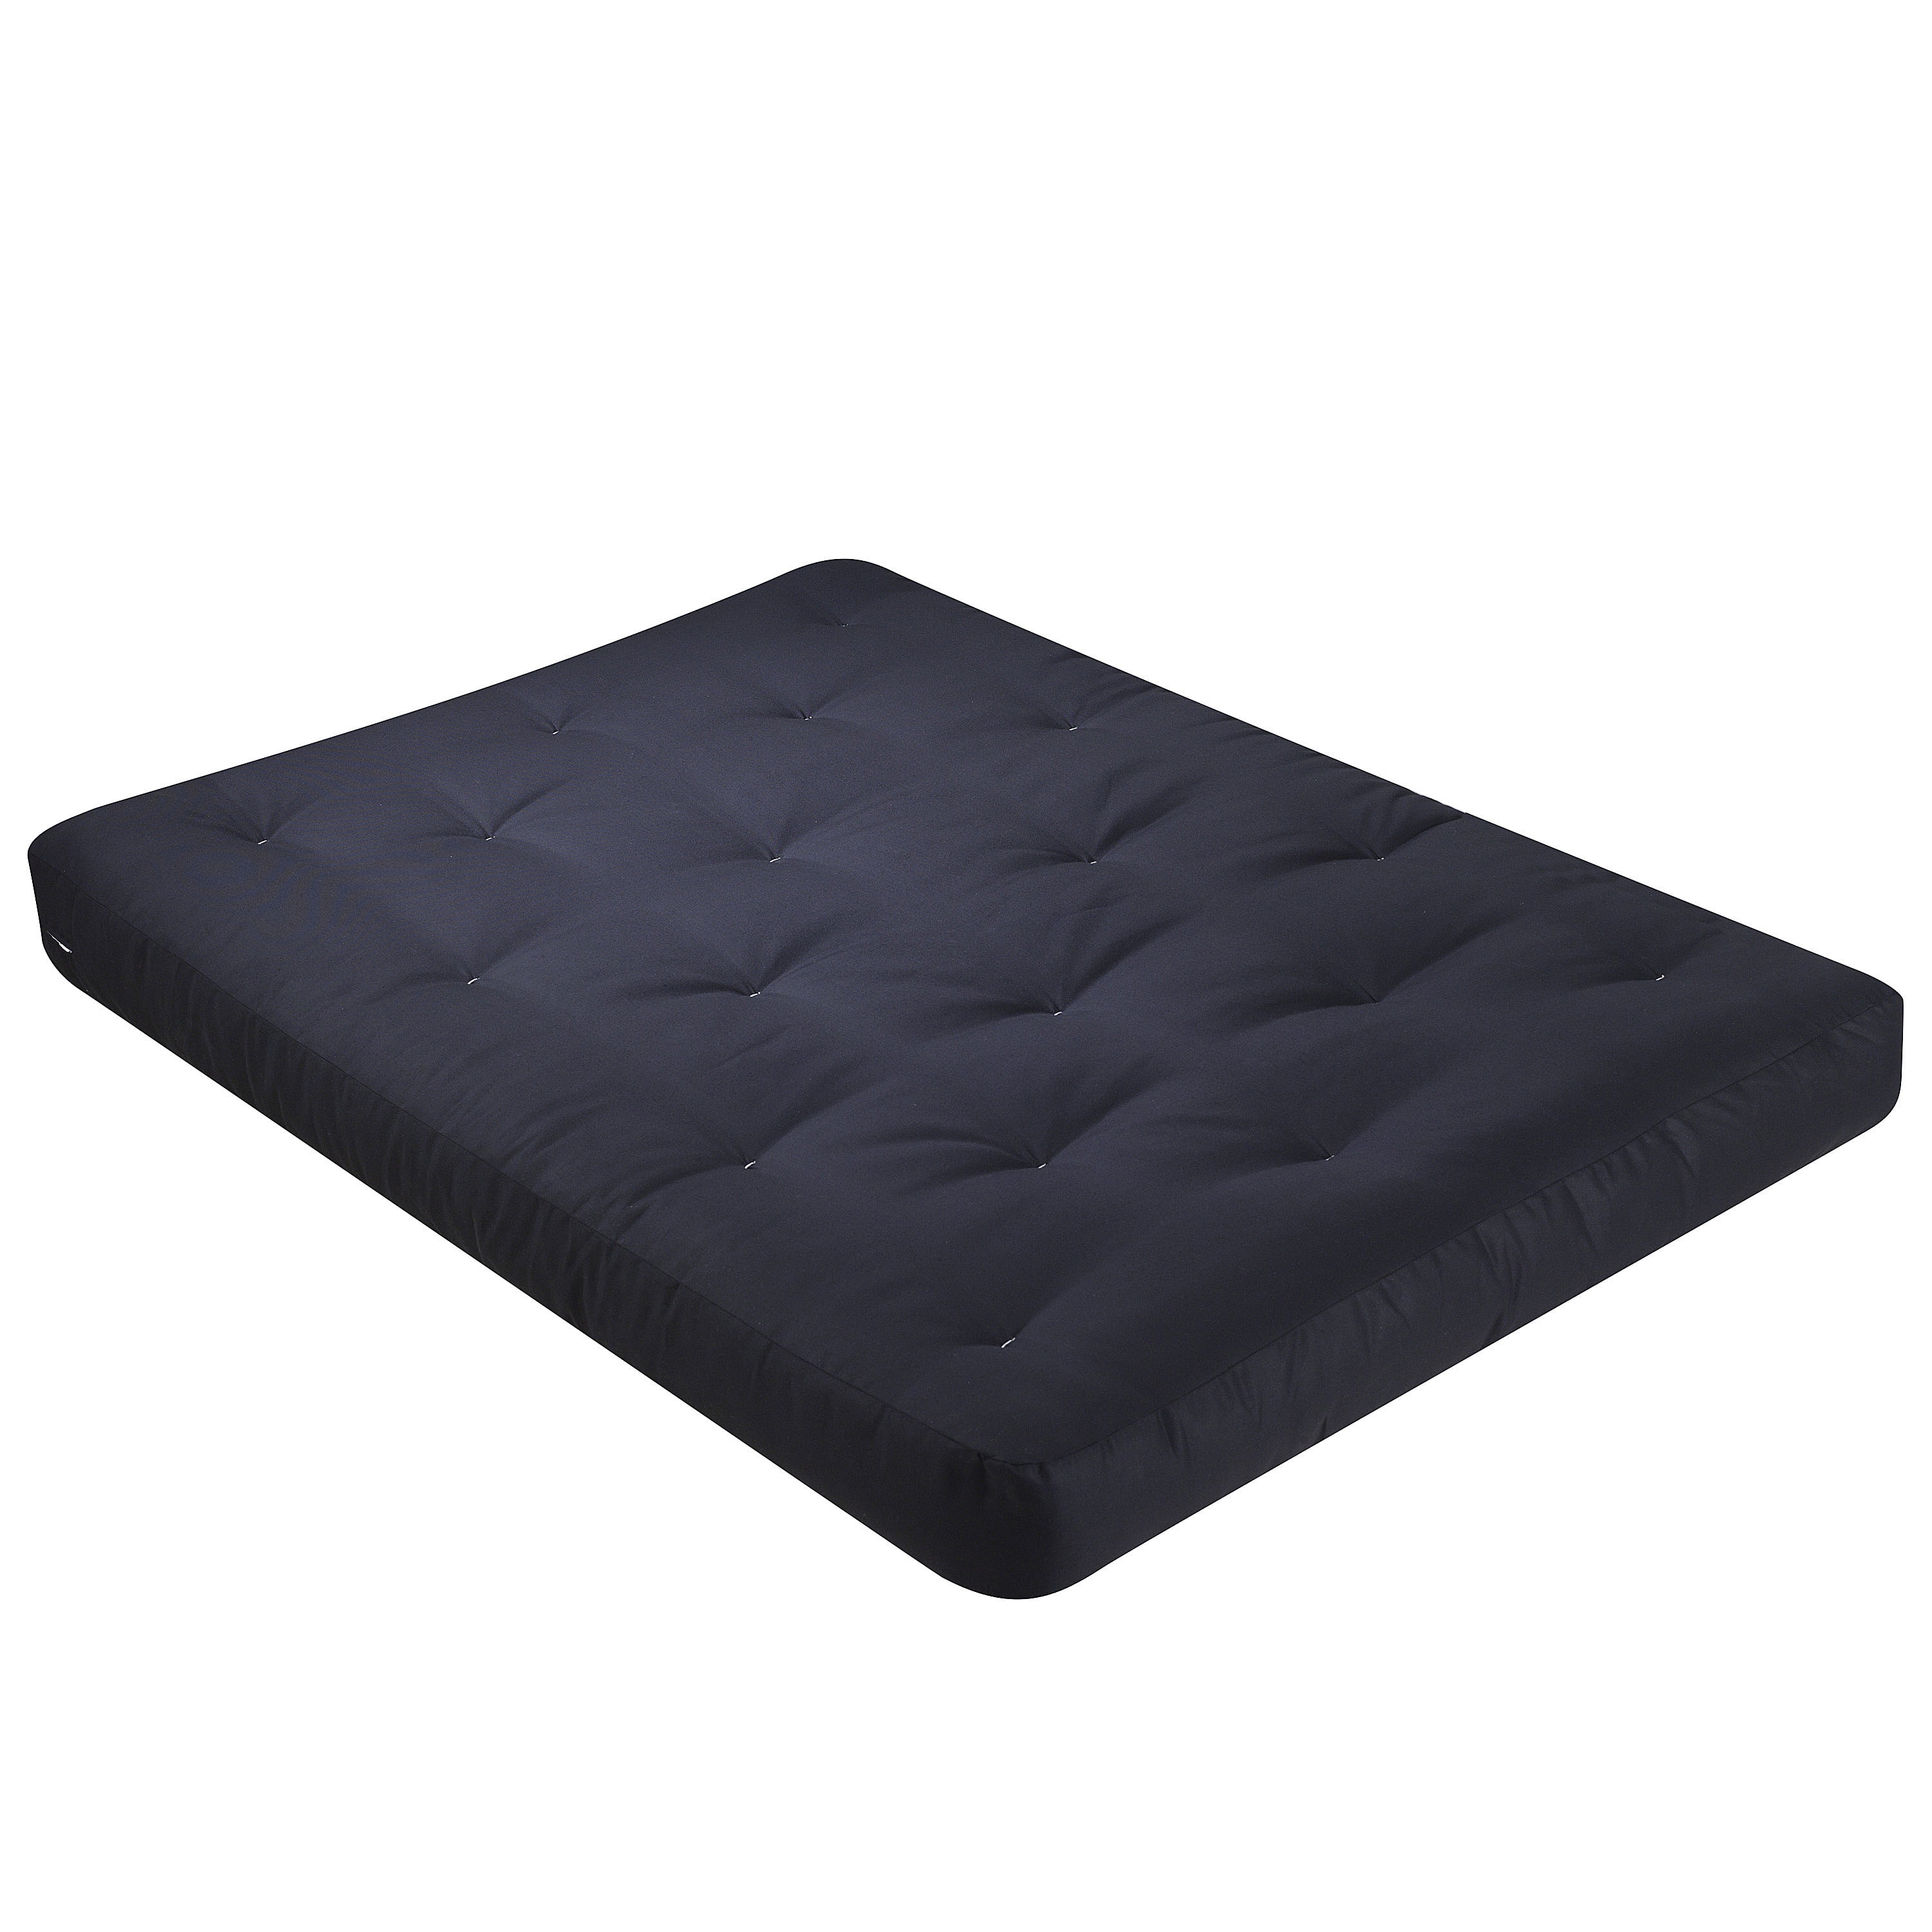 Deluxe 8" Thick Futon Mattress Many Sizes & Colors 